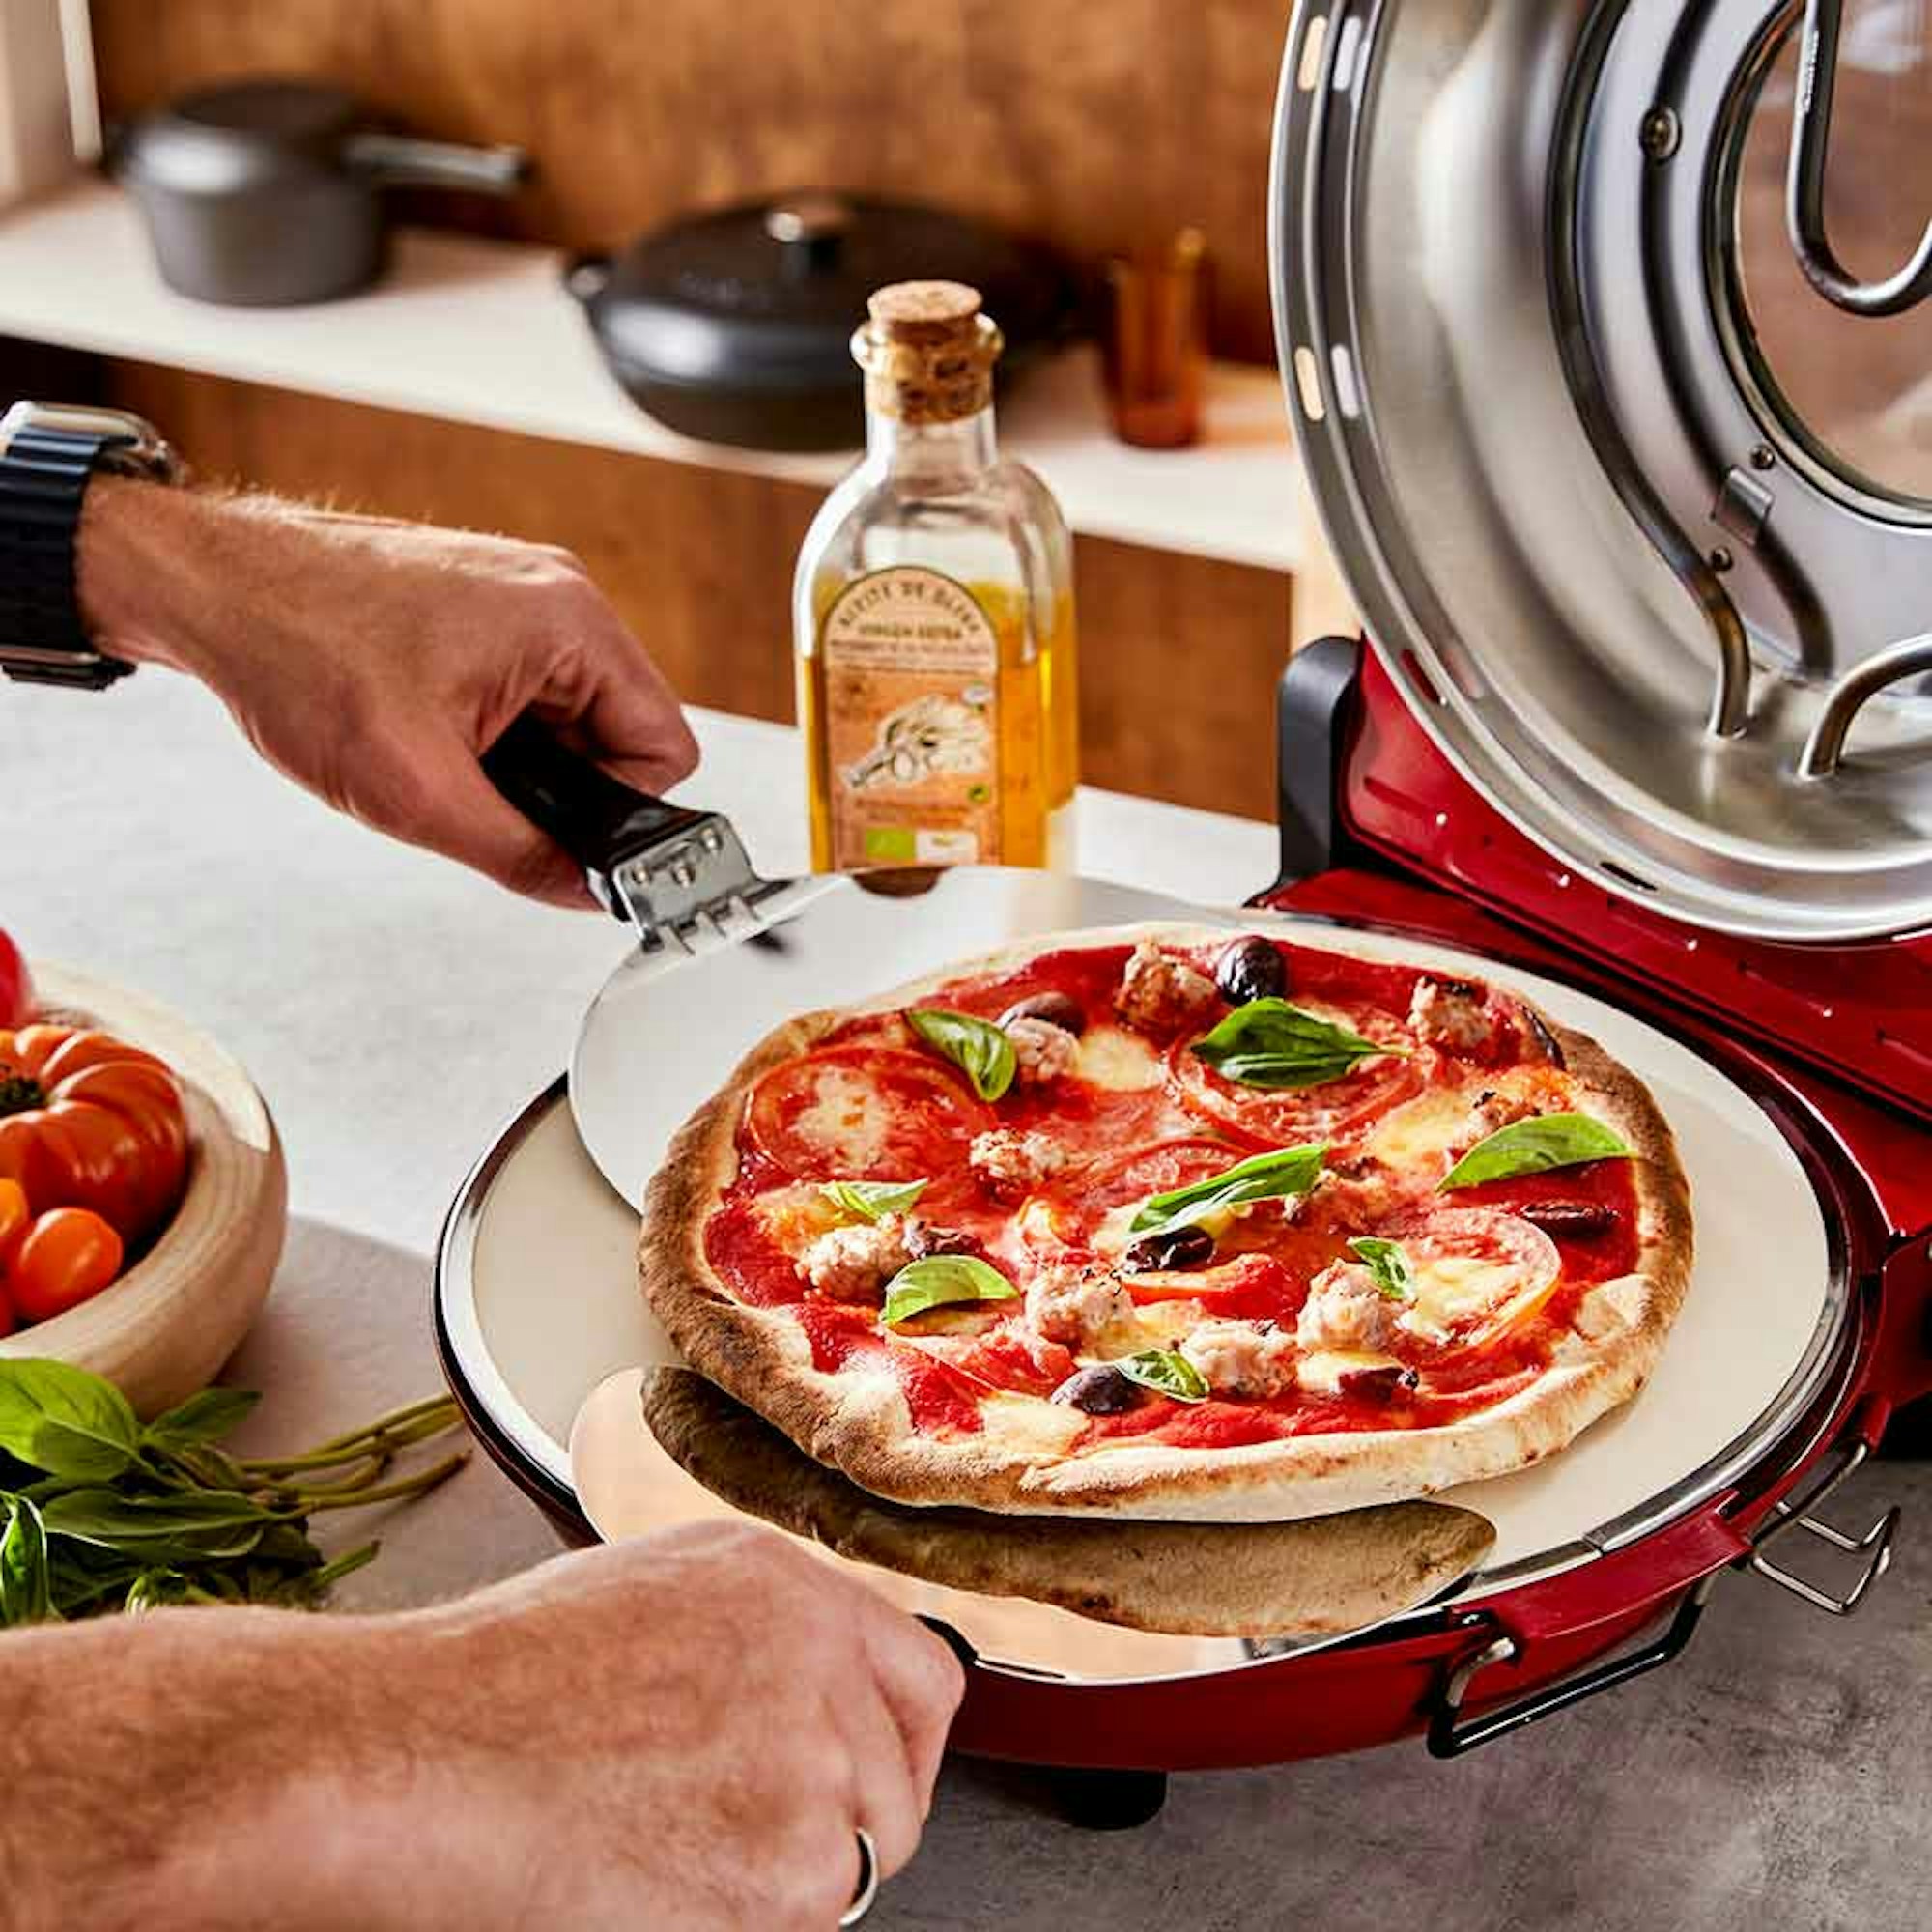 How to Use, Clean & Maintain a Pizza Stone? Baccarat The Gourmet Slice Pizza Oven. Pizza being removed from the oven using paddles.